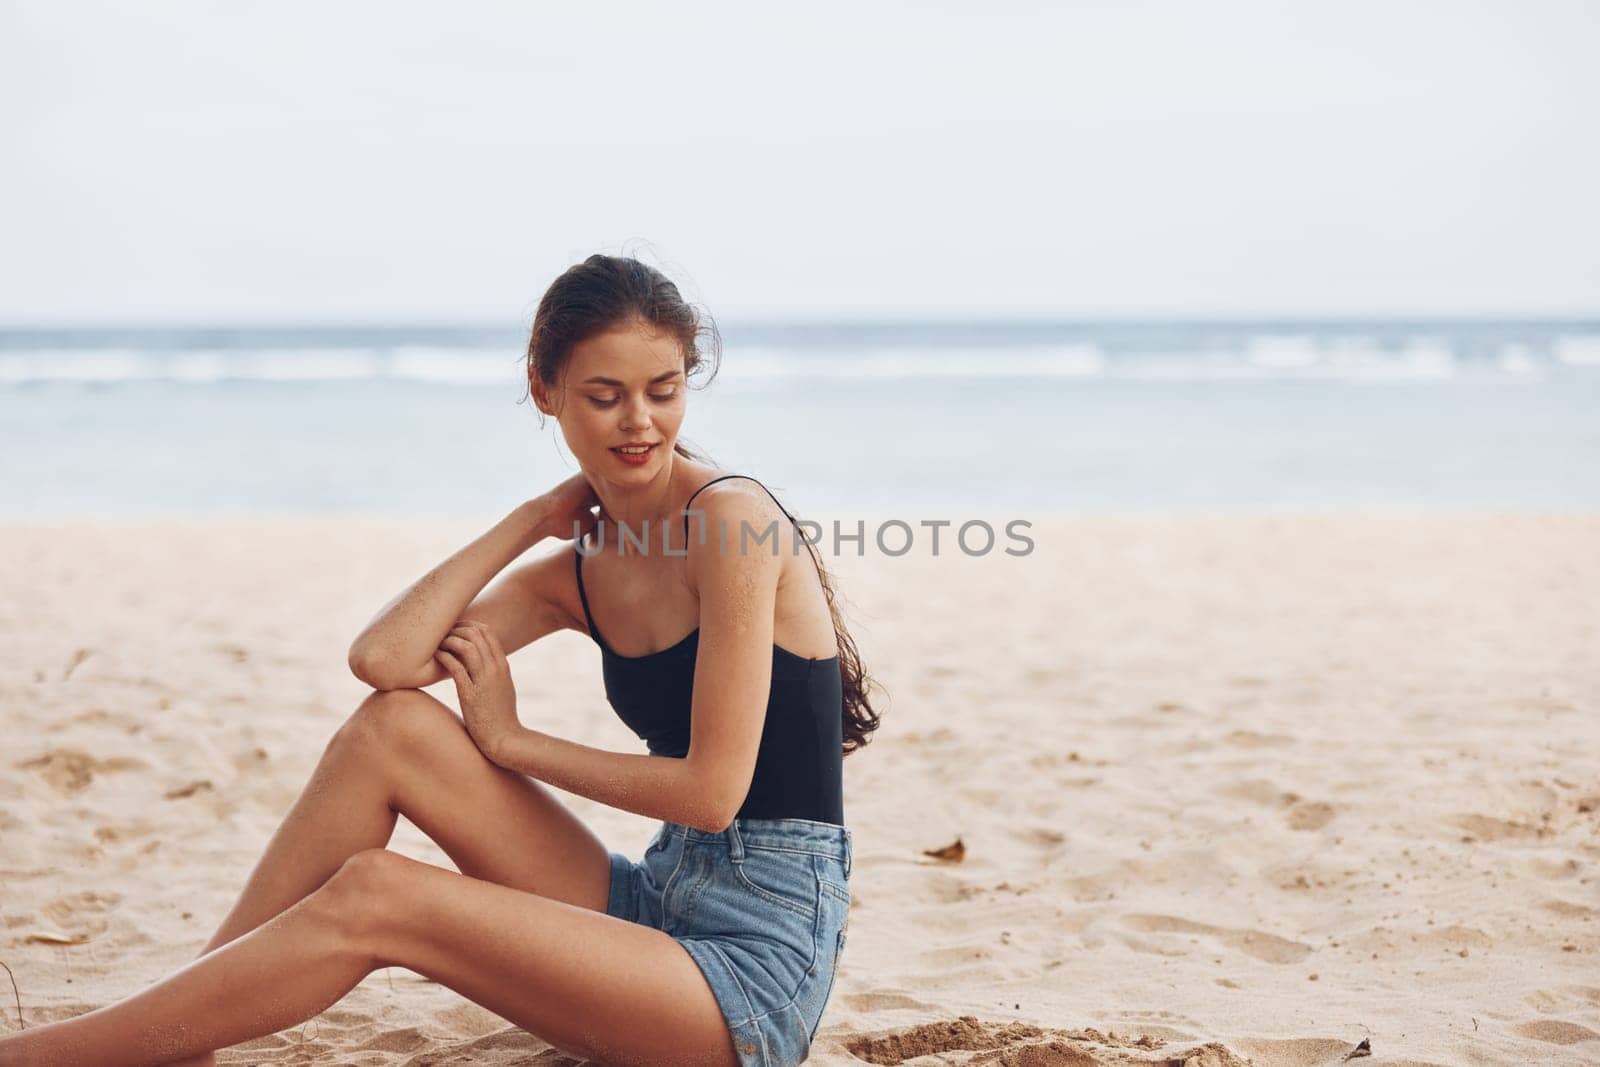 woman tan smile sexy lifestyle model sitting body back nature person view outdoor sand travel caucasian freedom beach fashion sea ocean vacation